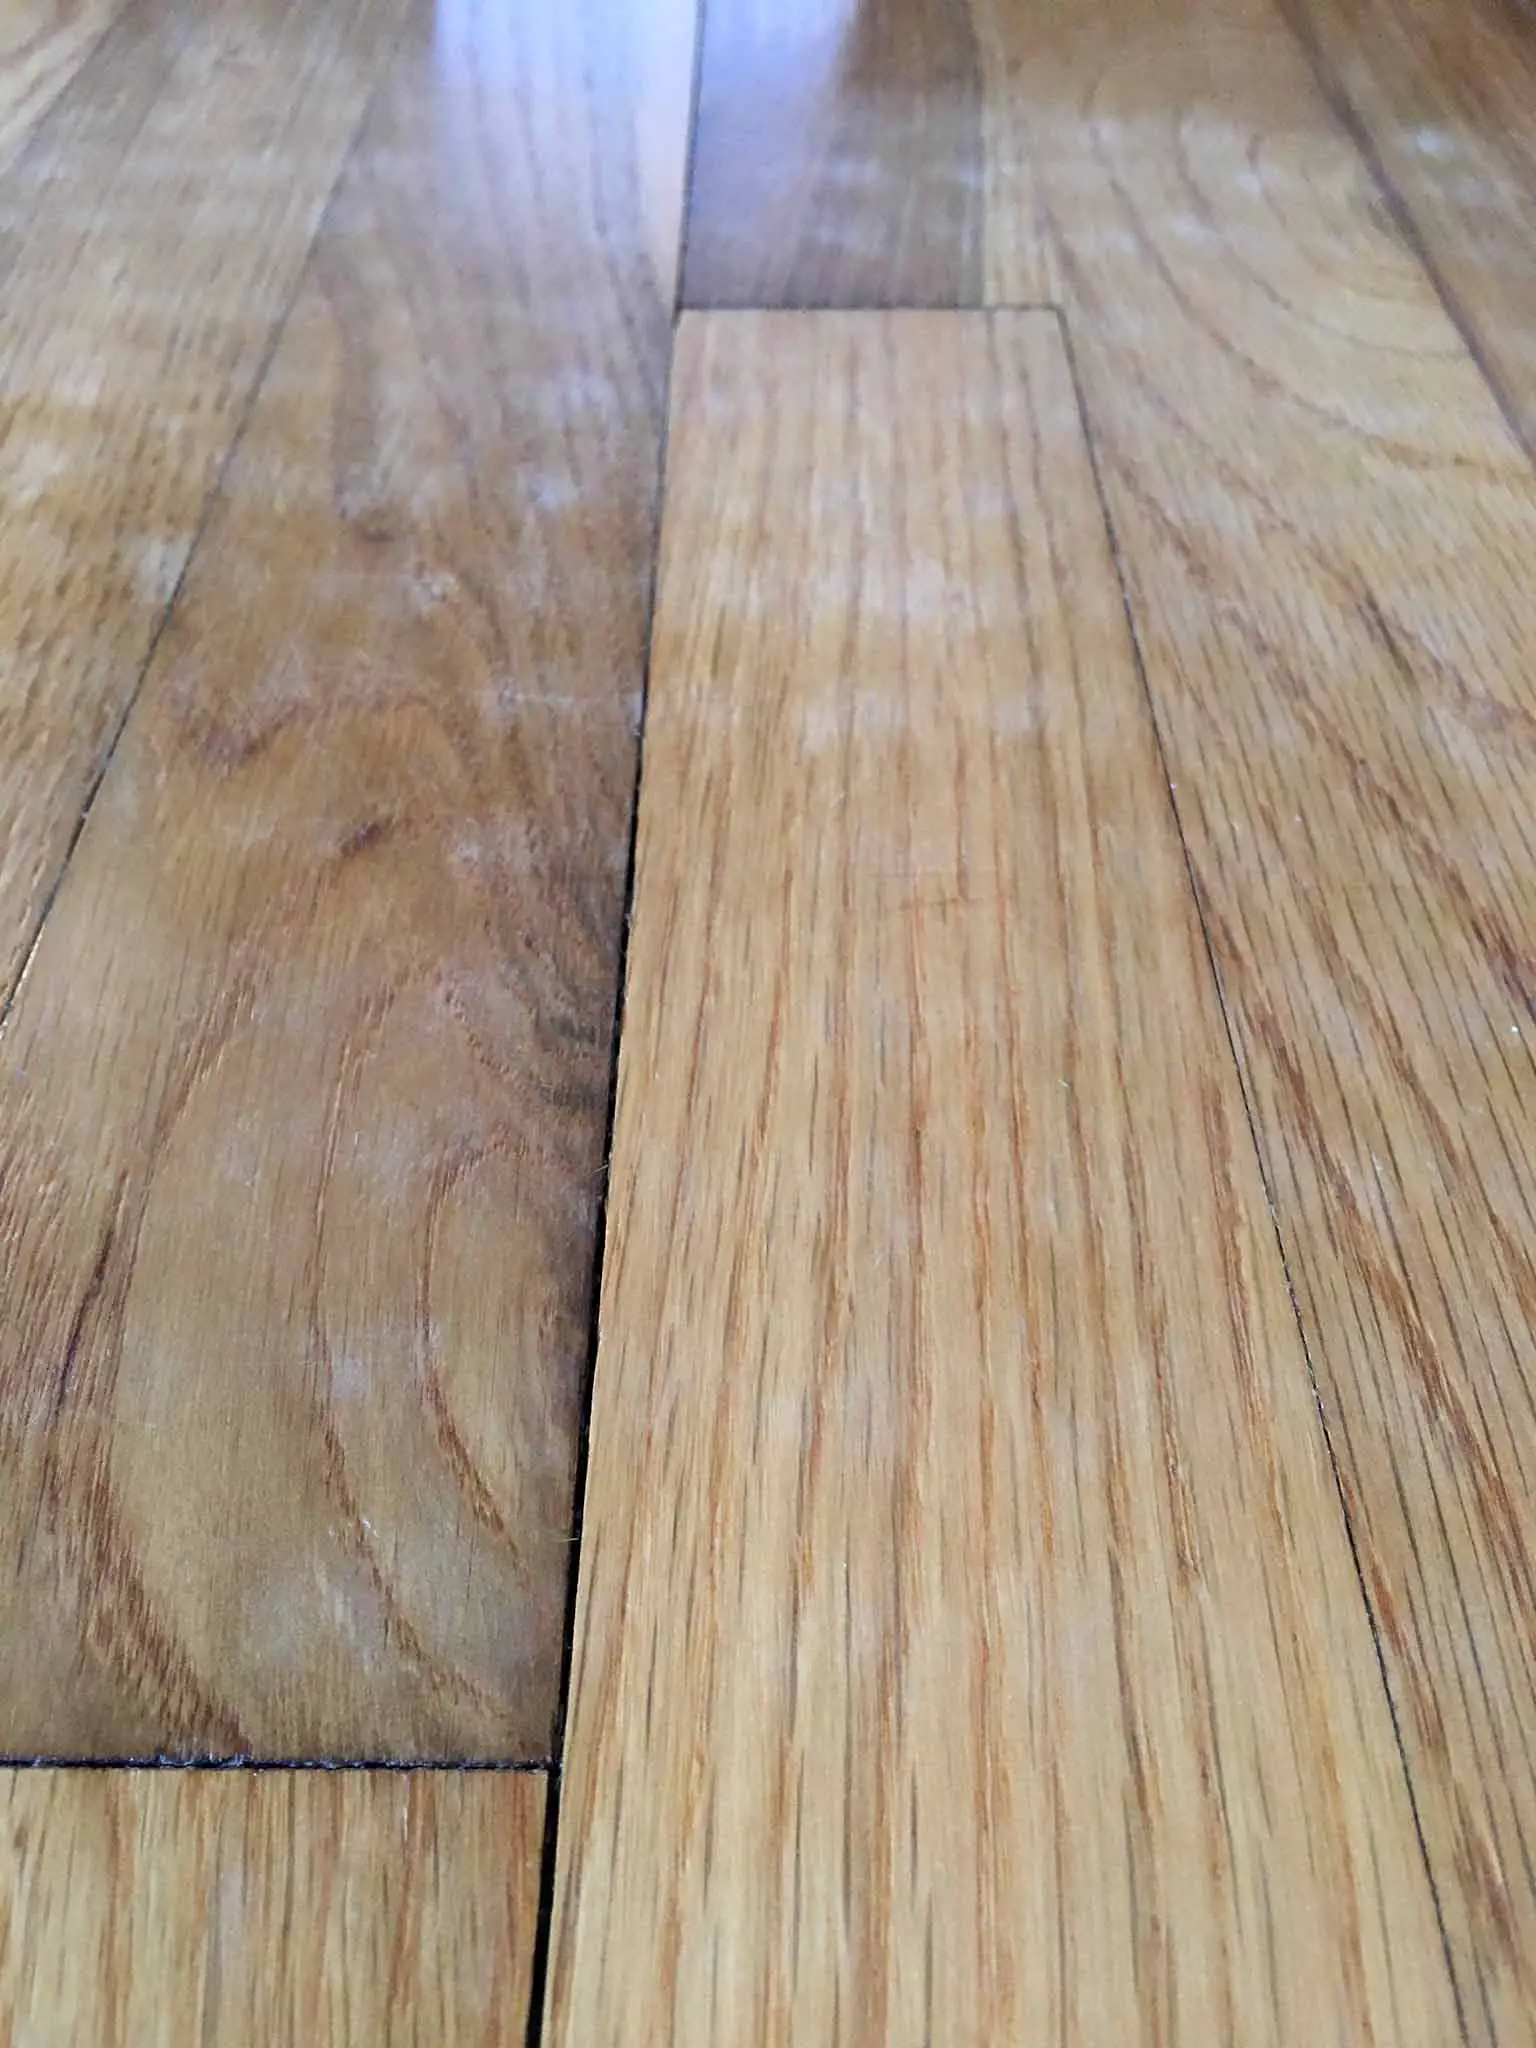 How I Wrecked My Hardwood Floors And, What To Put Under Area Rug On Hardwood Floor